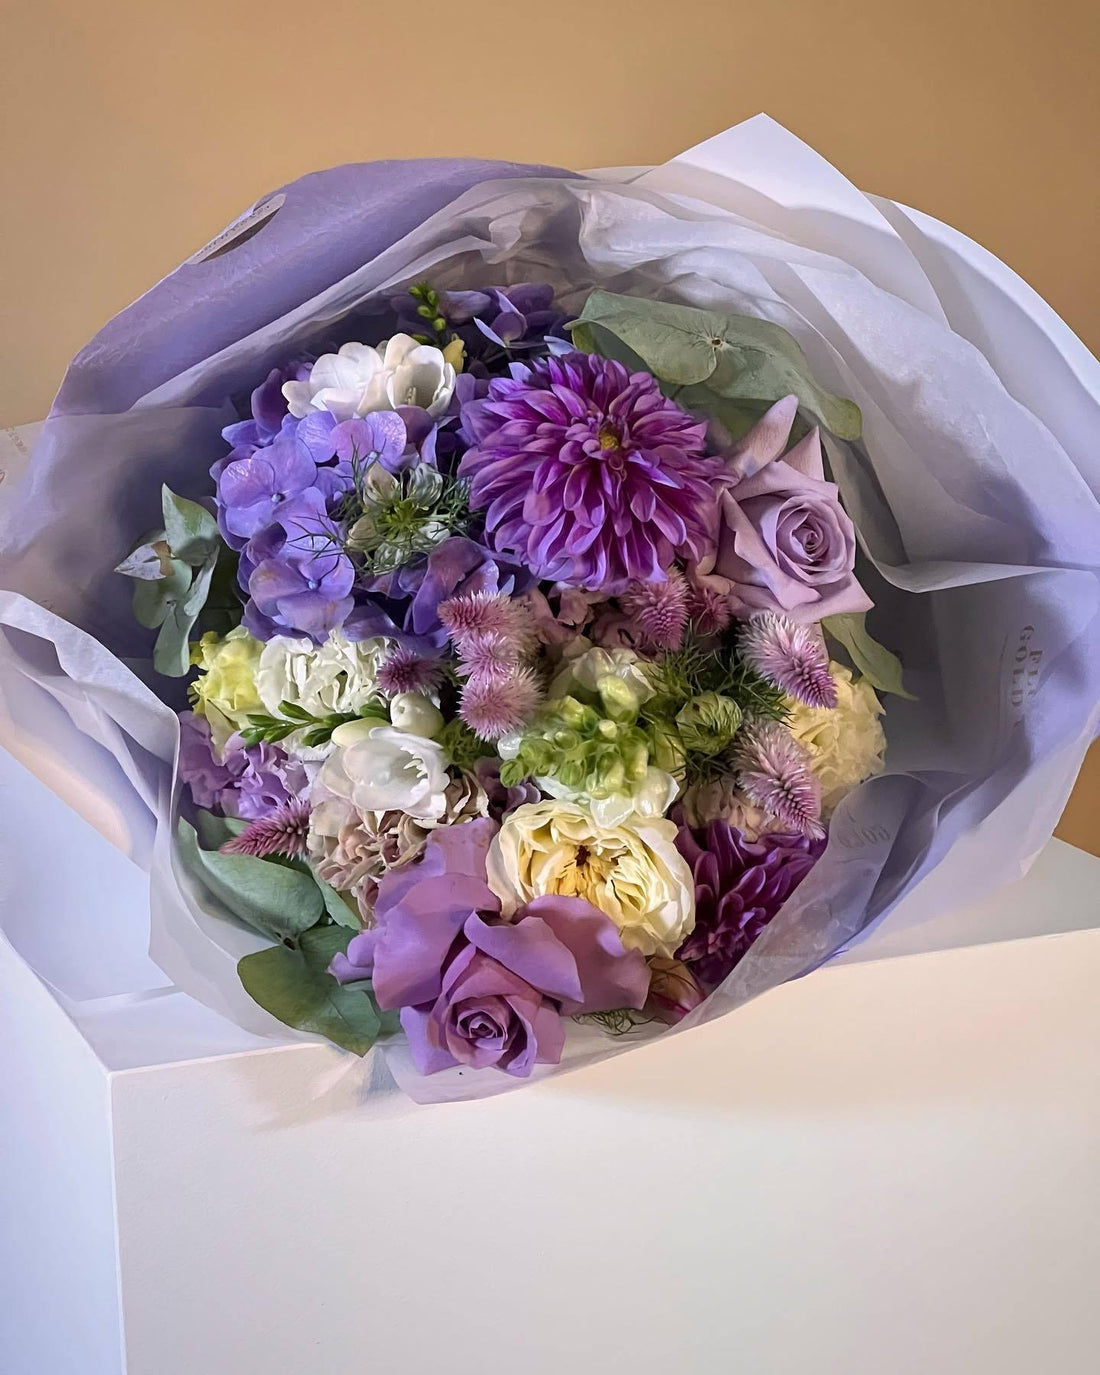 L A V E N D E R  D R E A M - An English Garden Bouquet in Lilacs and Purples<br />
<br />
Do you rem - Flowers Gold Coast